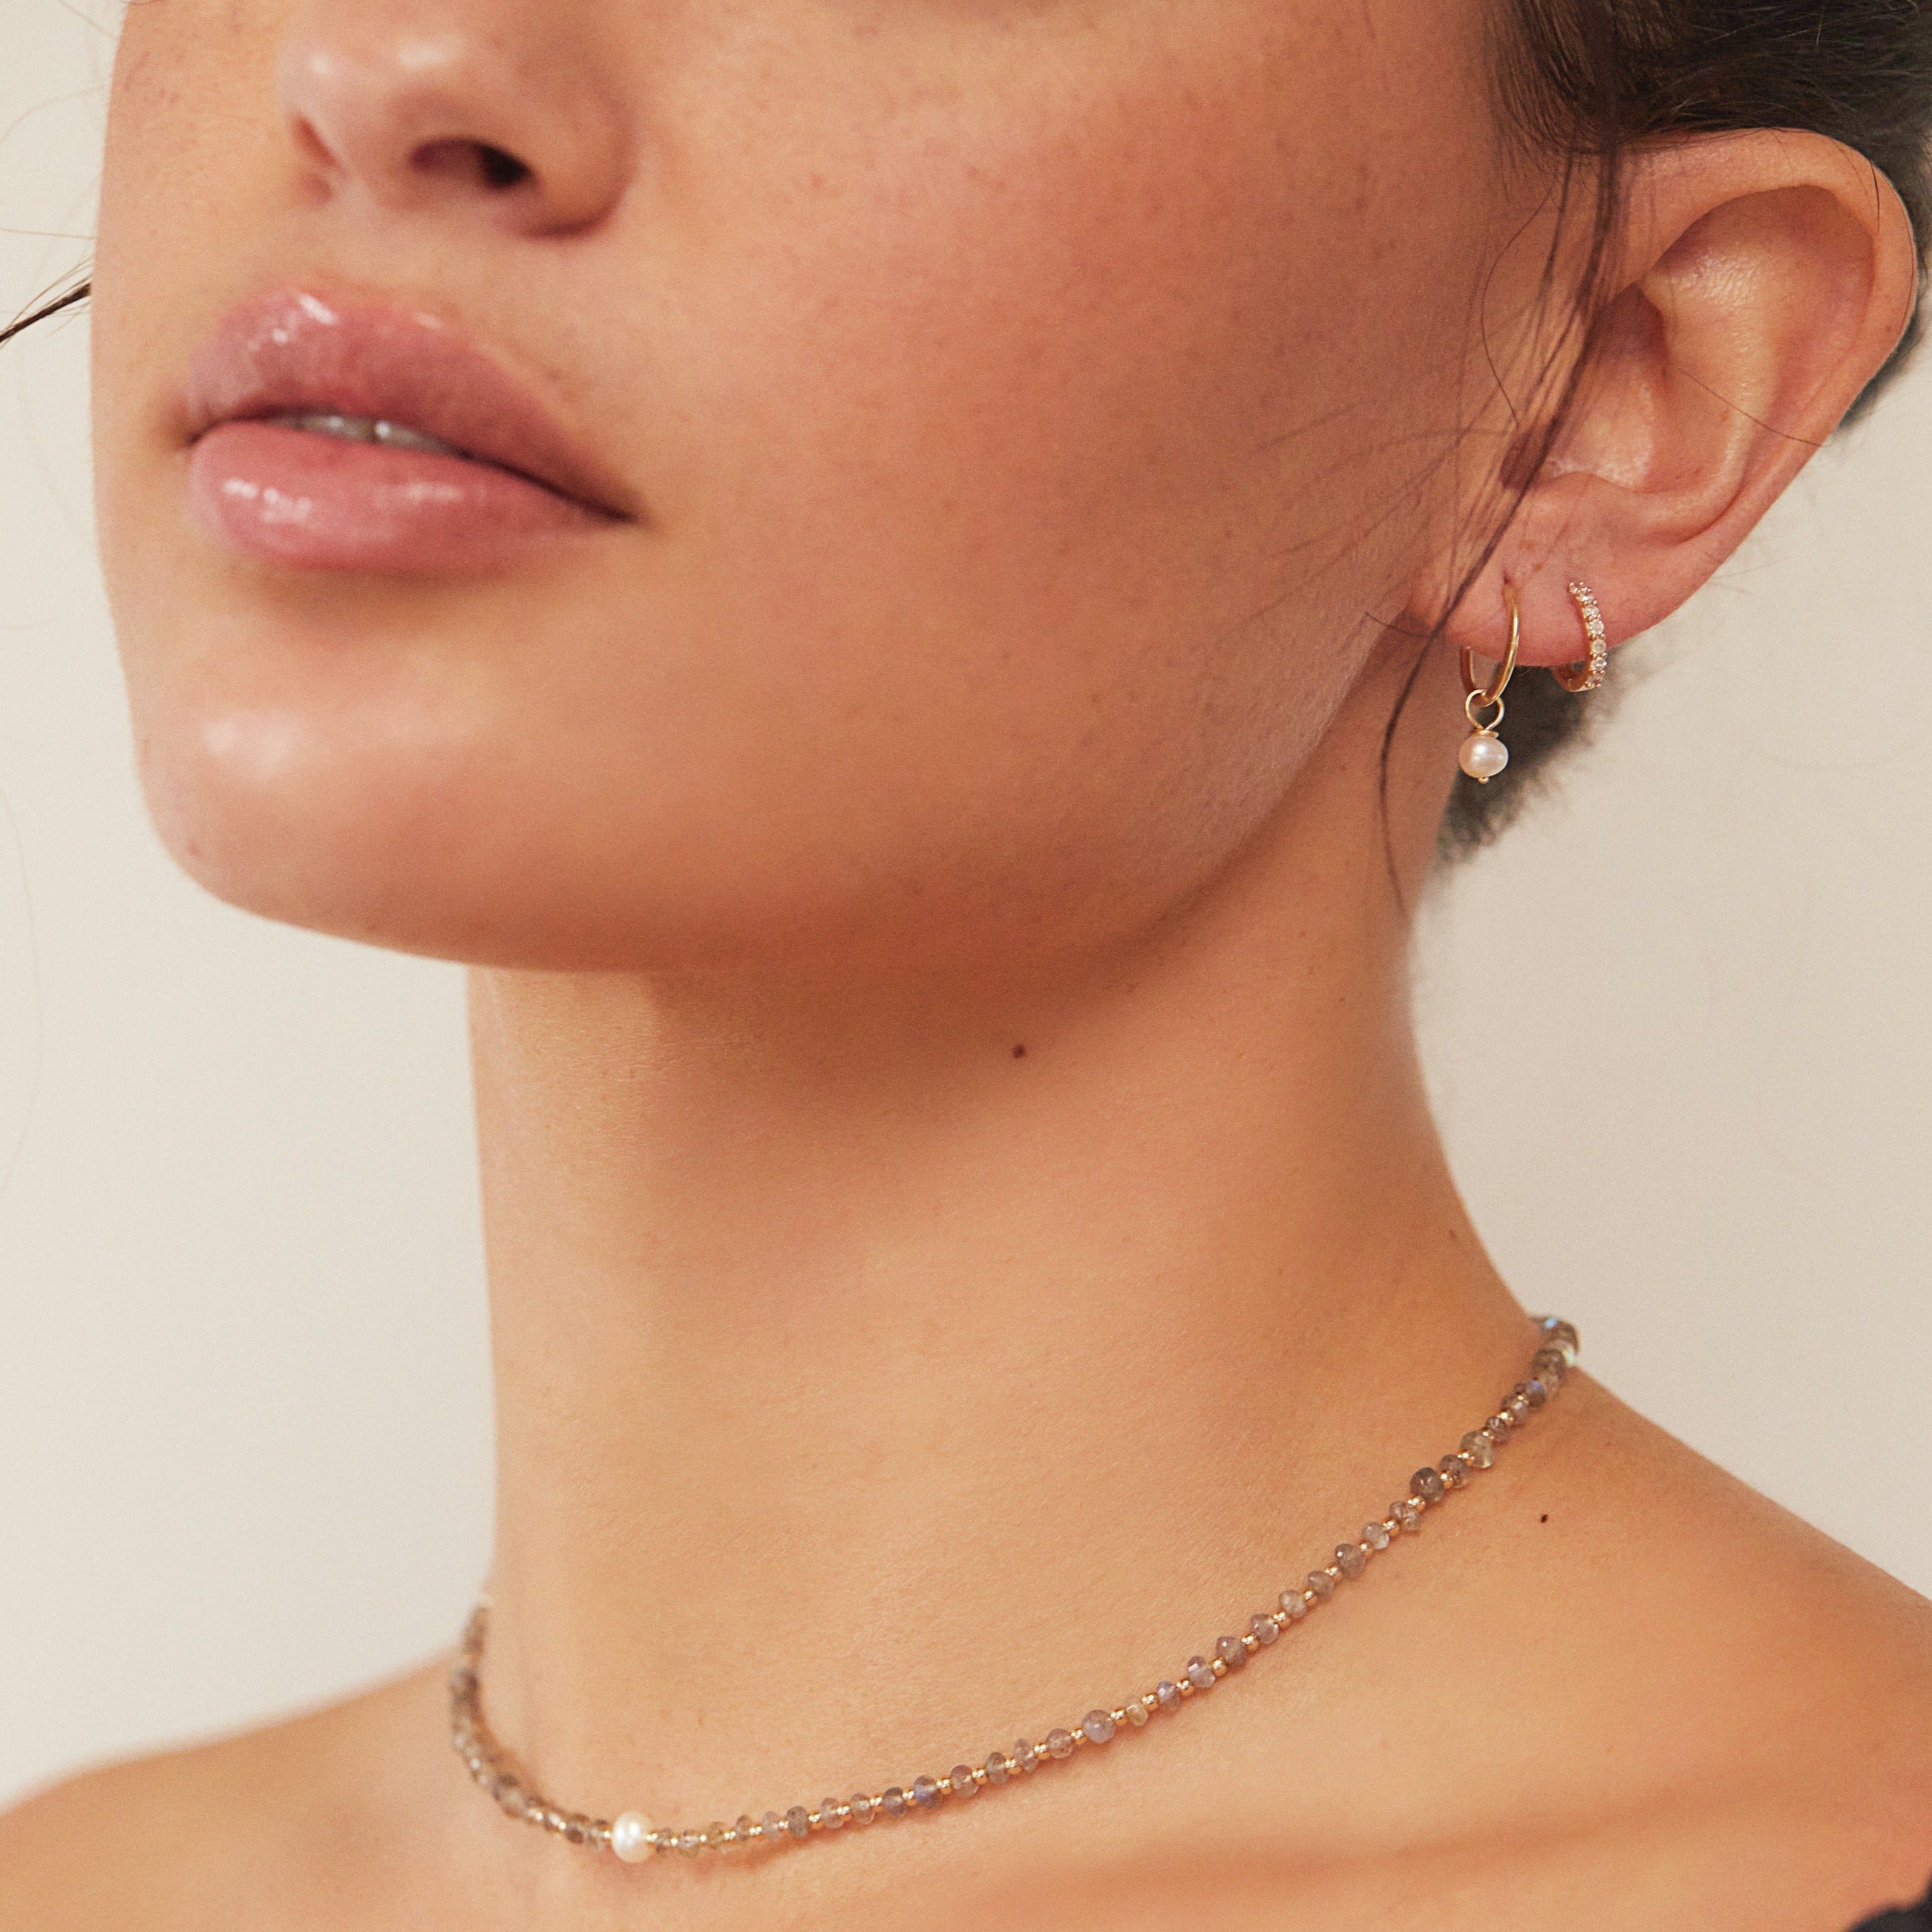 A woman wearing a gold small pearl drop hoop earring and a gold diamond style huggie hoop earring in her ear lobe and a pearl choker around her neck